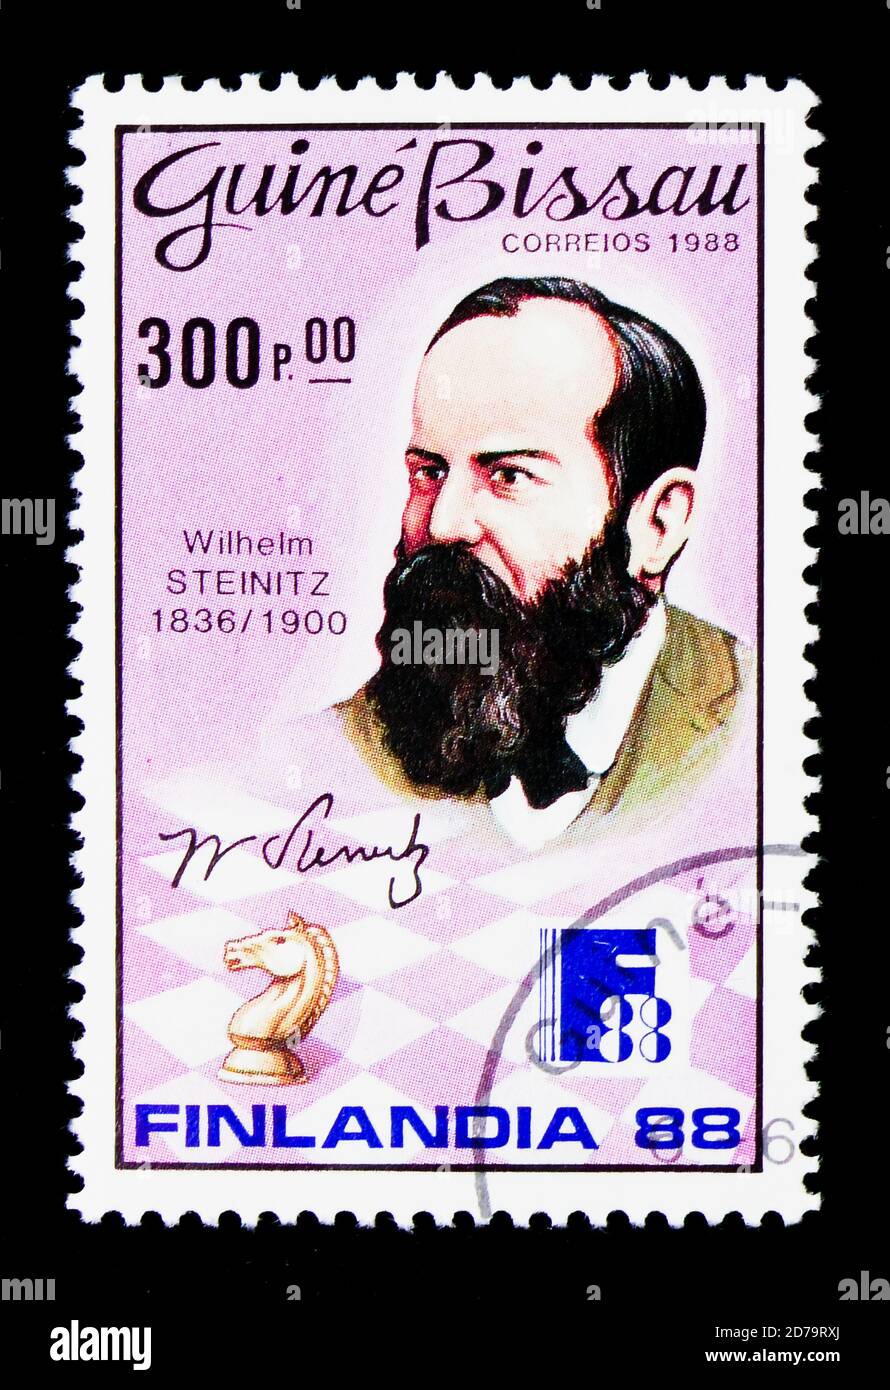 MOSCOW, RUSSIA - DECEMBER 21, 2017: A stamp printed in Guinea-Bissau shows Wilhelm Steinitz, Chess players serie, circa 1988 Stock Photo